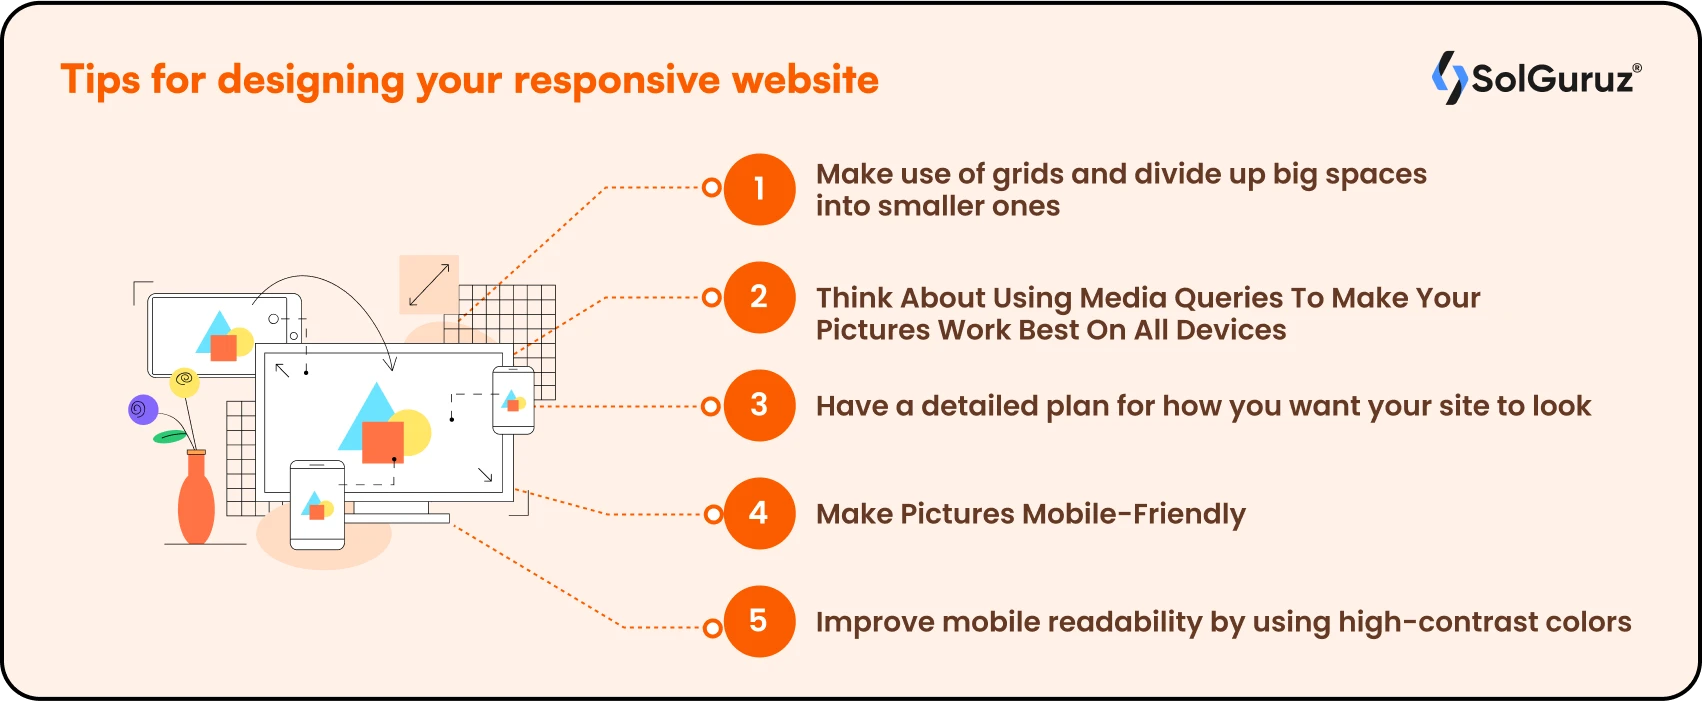 Tips for designing your responsive website